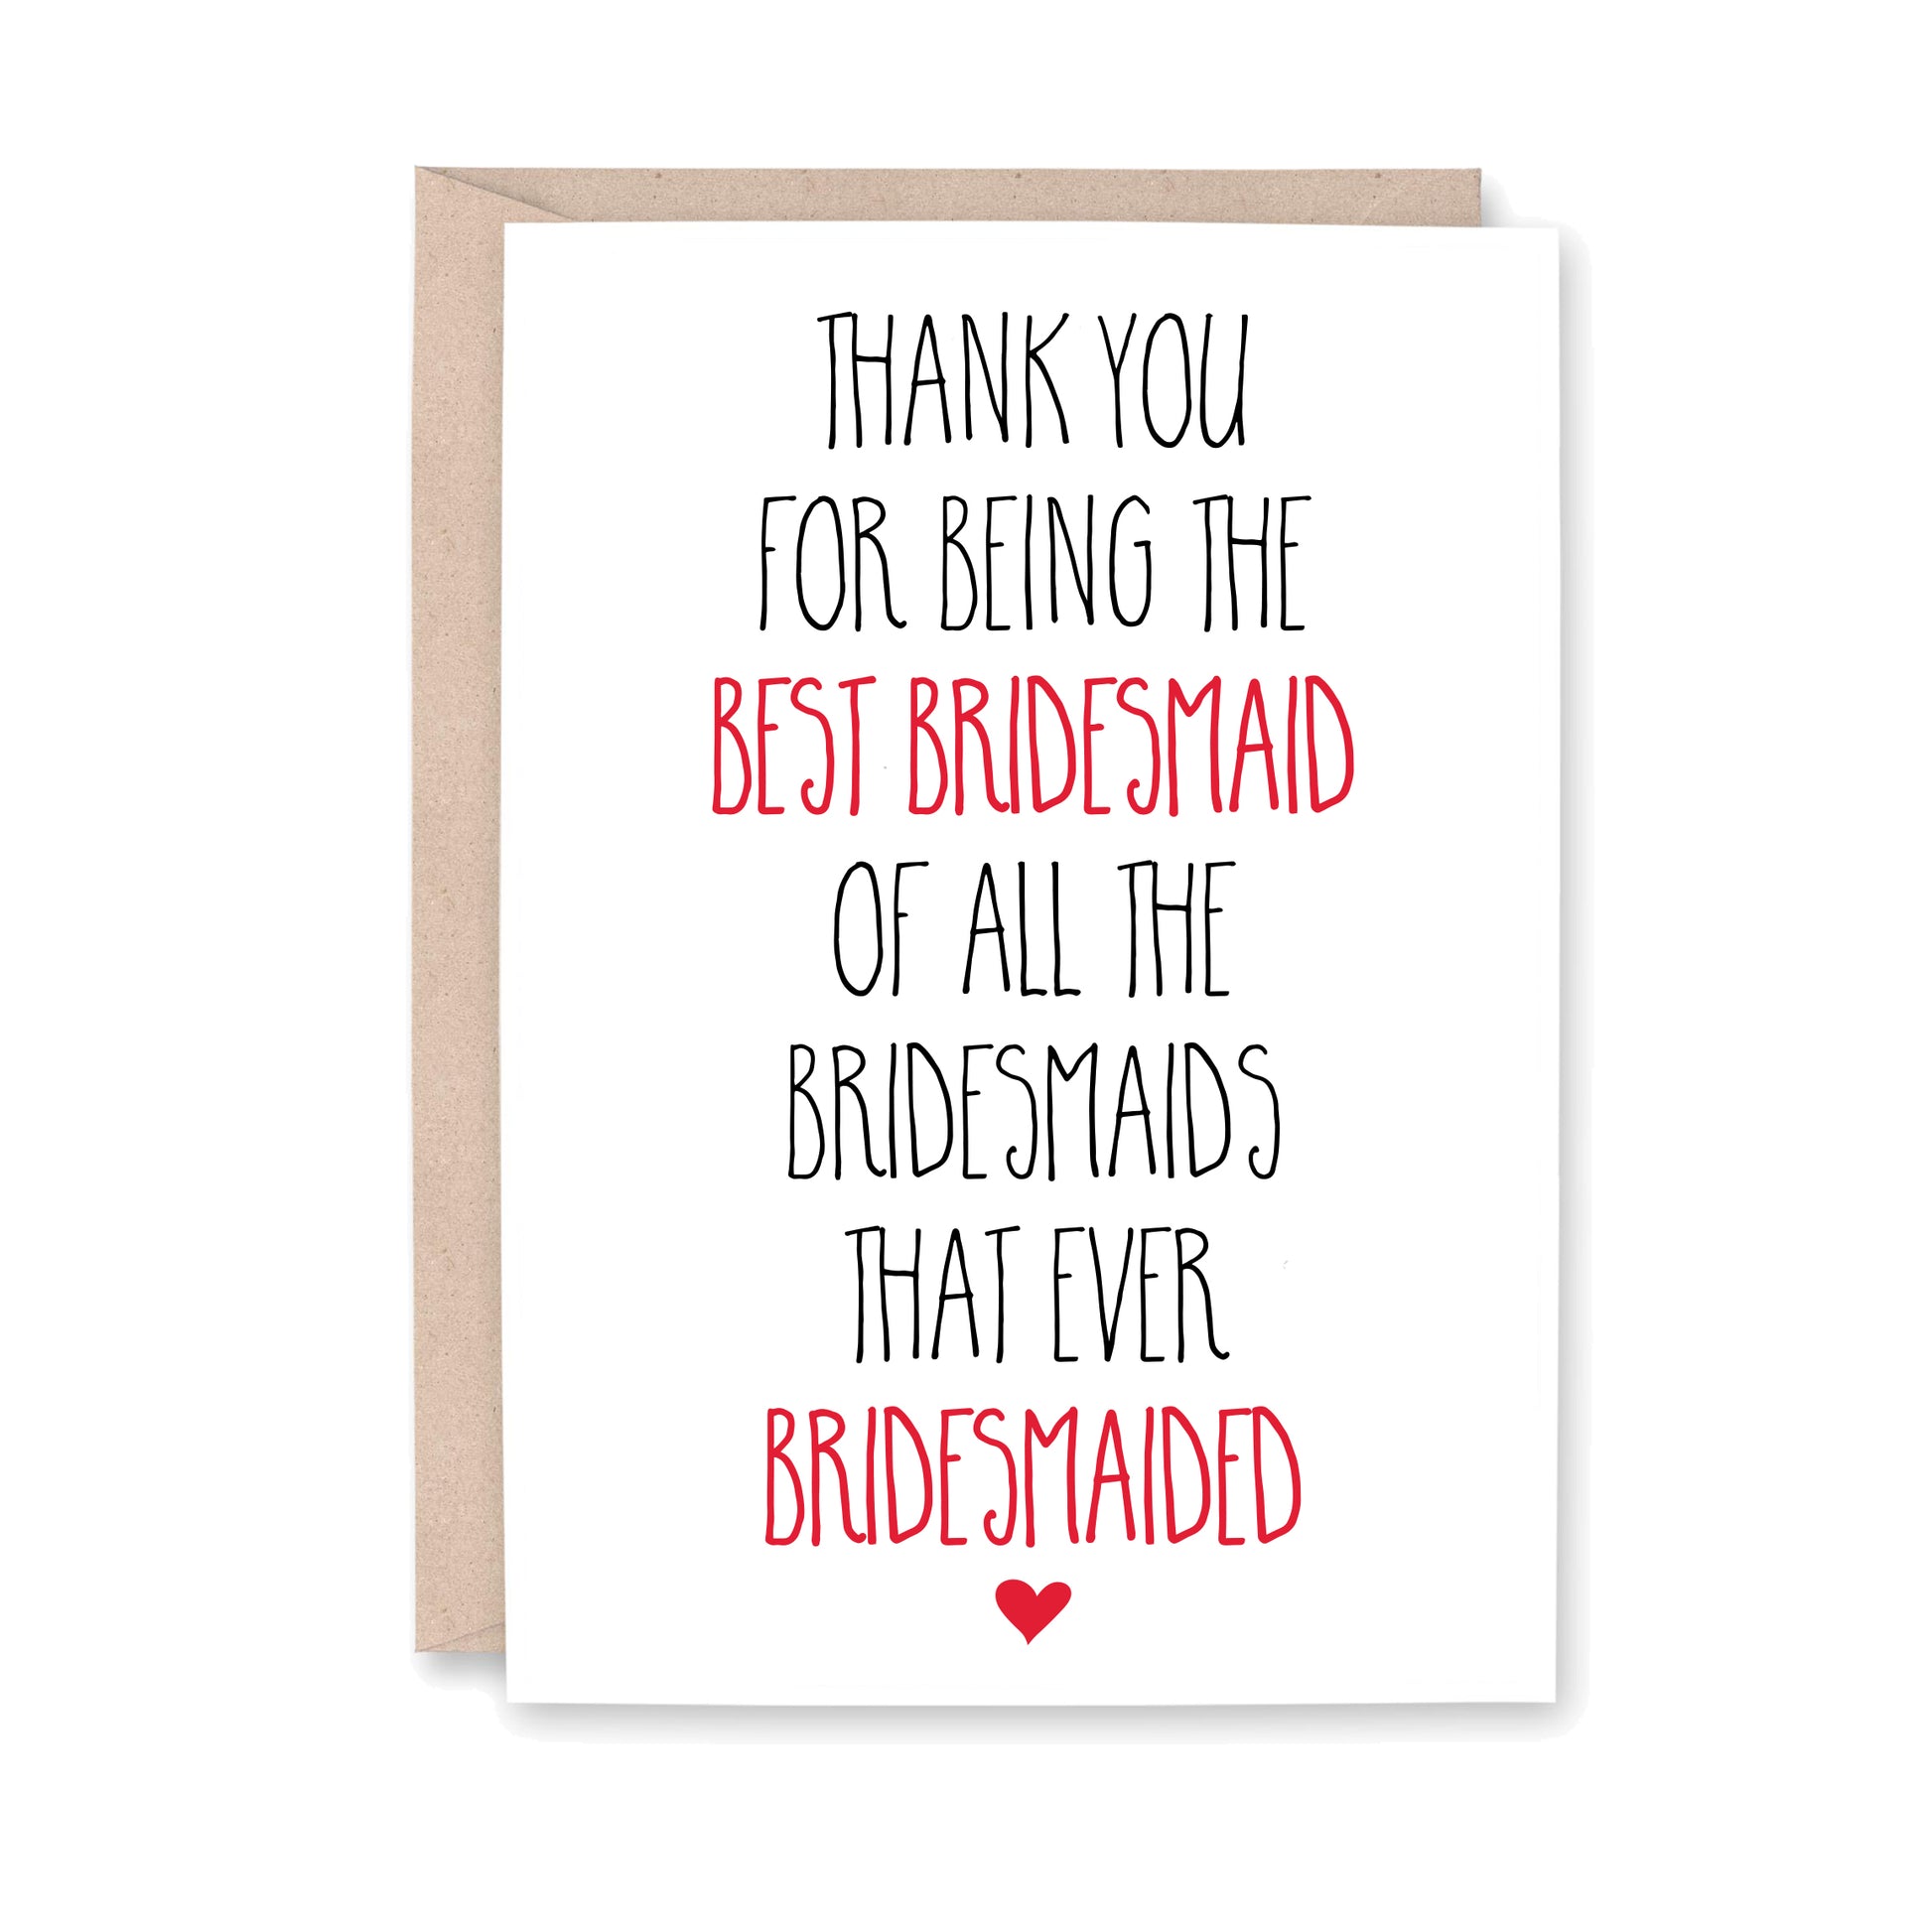 Thank you for being the best bridesmaid of all the Bridesmaids that ever Bridesmaided